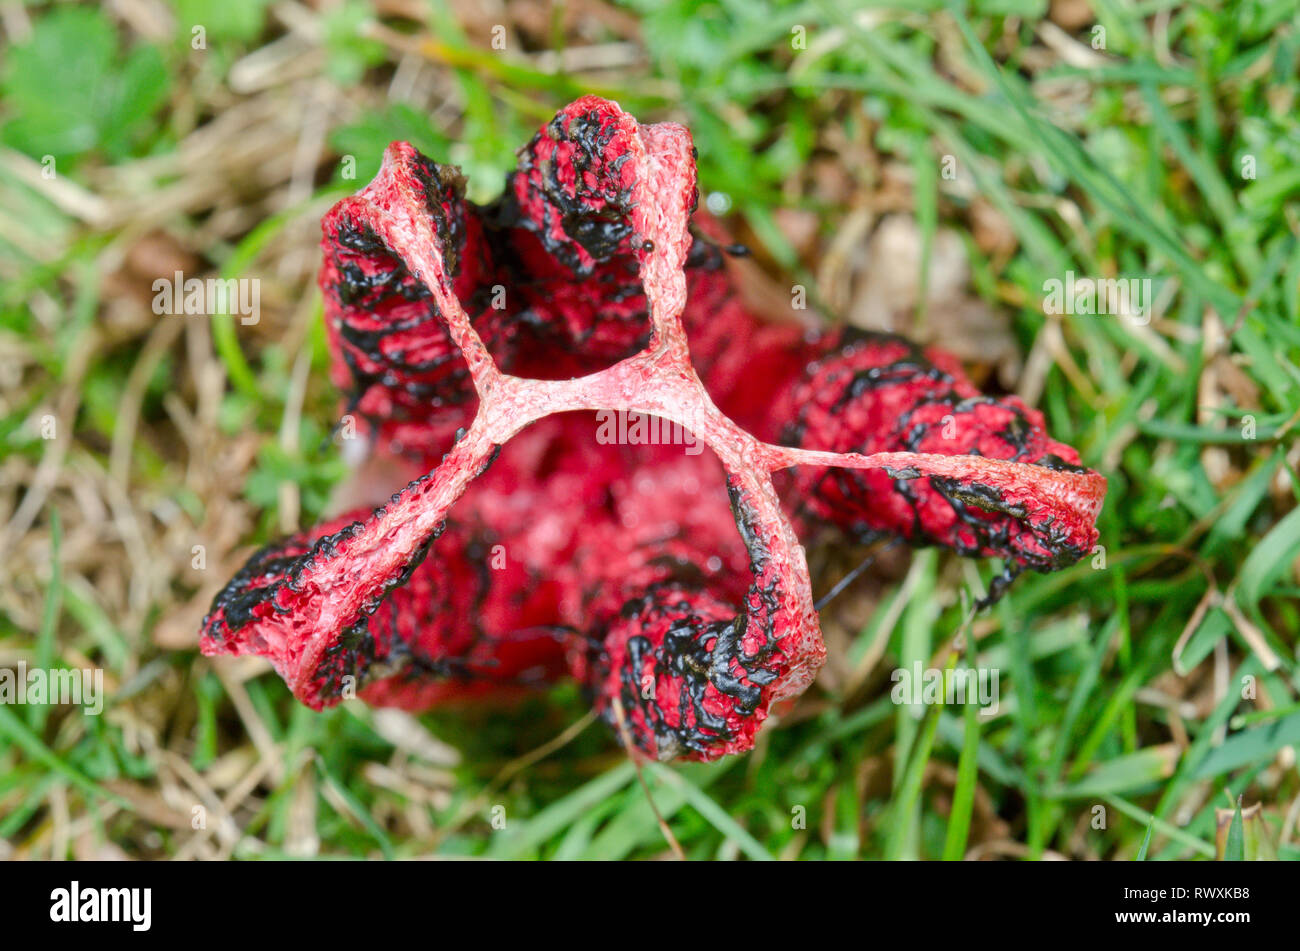 Devil's Fingers or Octopus Stinkhorn Fungus (Clathrus archeri) with arms about to break free. Sussex, UK Stock Photo